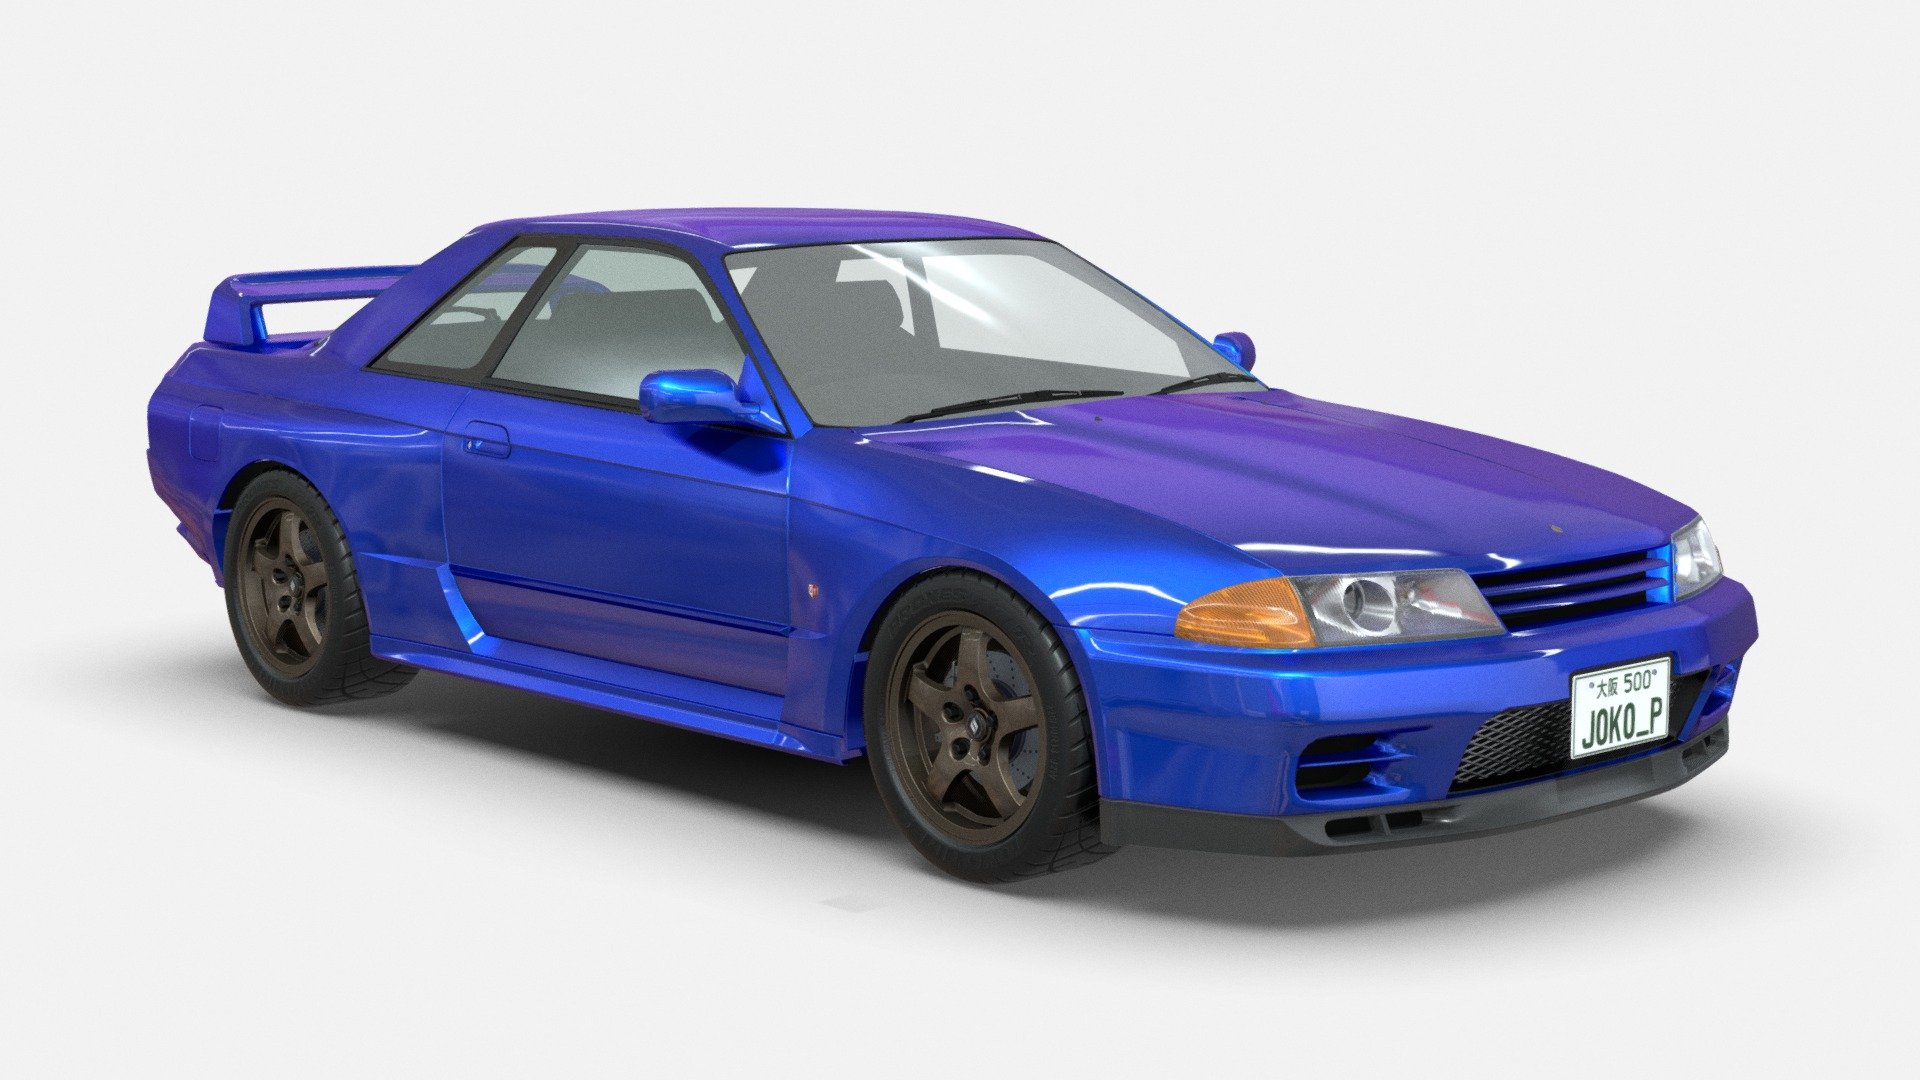 This is a Nissan Skyline GT-R R32 I modelled from May to around mid June. The model has UV ready for livery on the body and the windows. It also has the badges, the &ldquo;Skyline